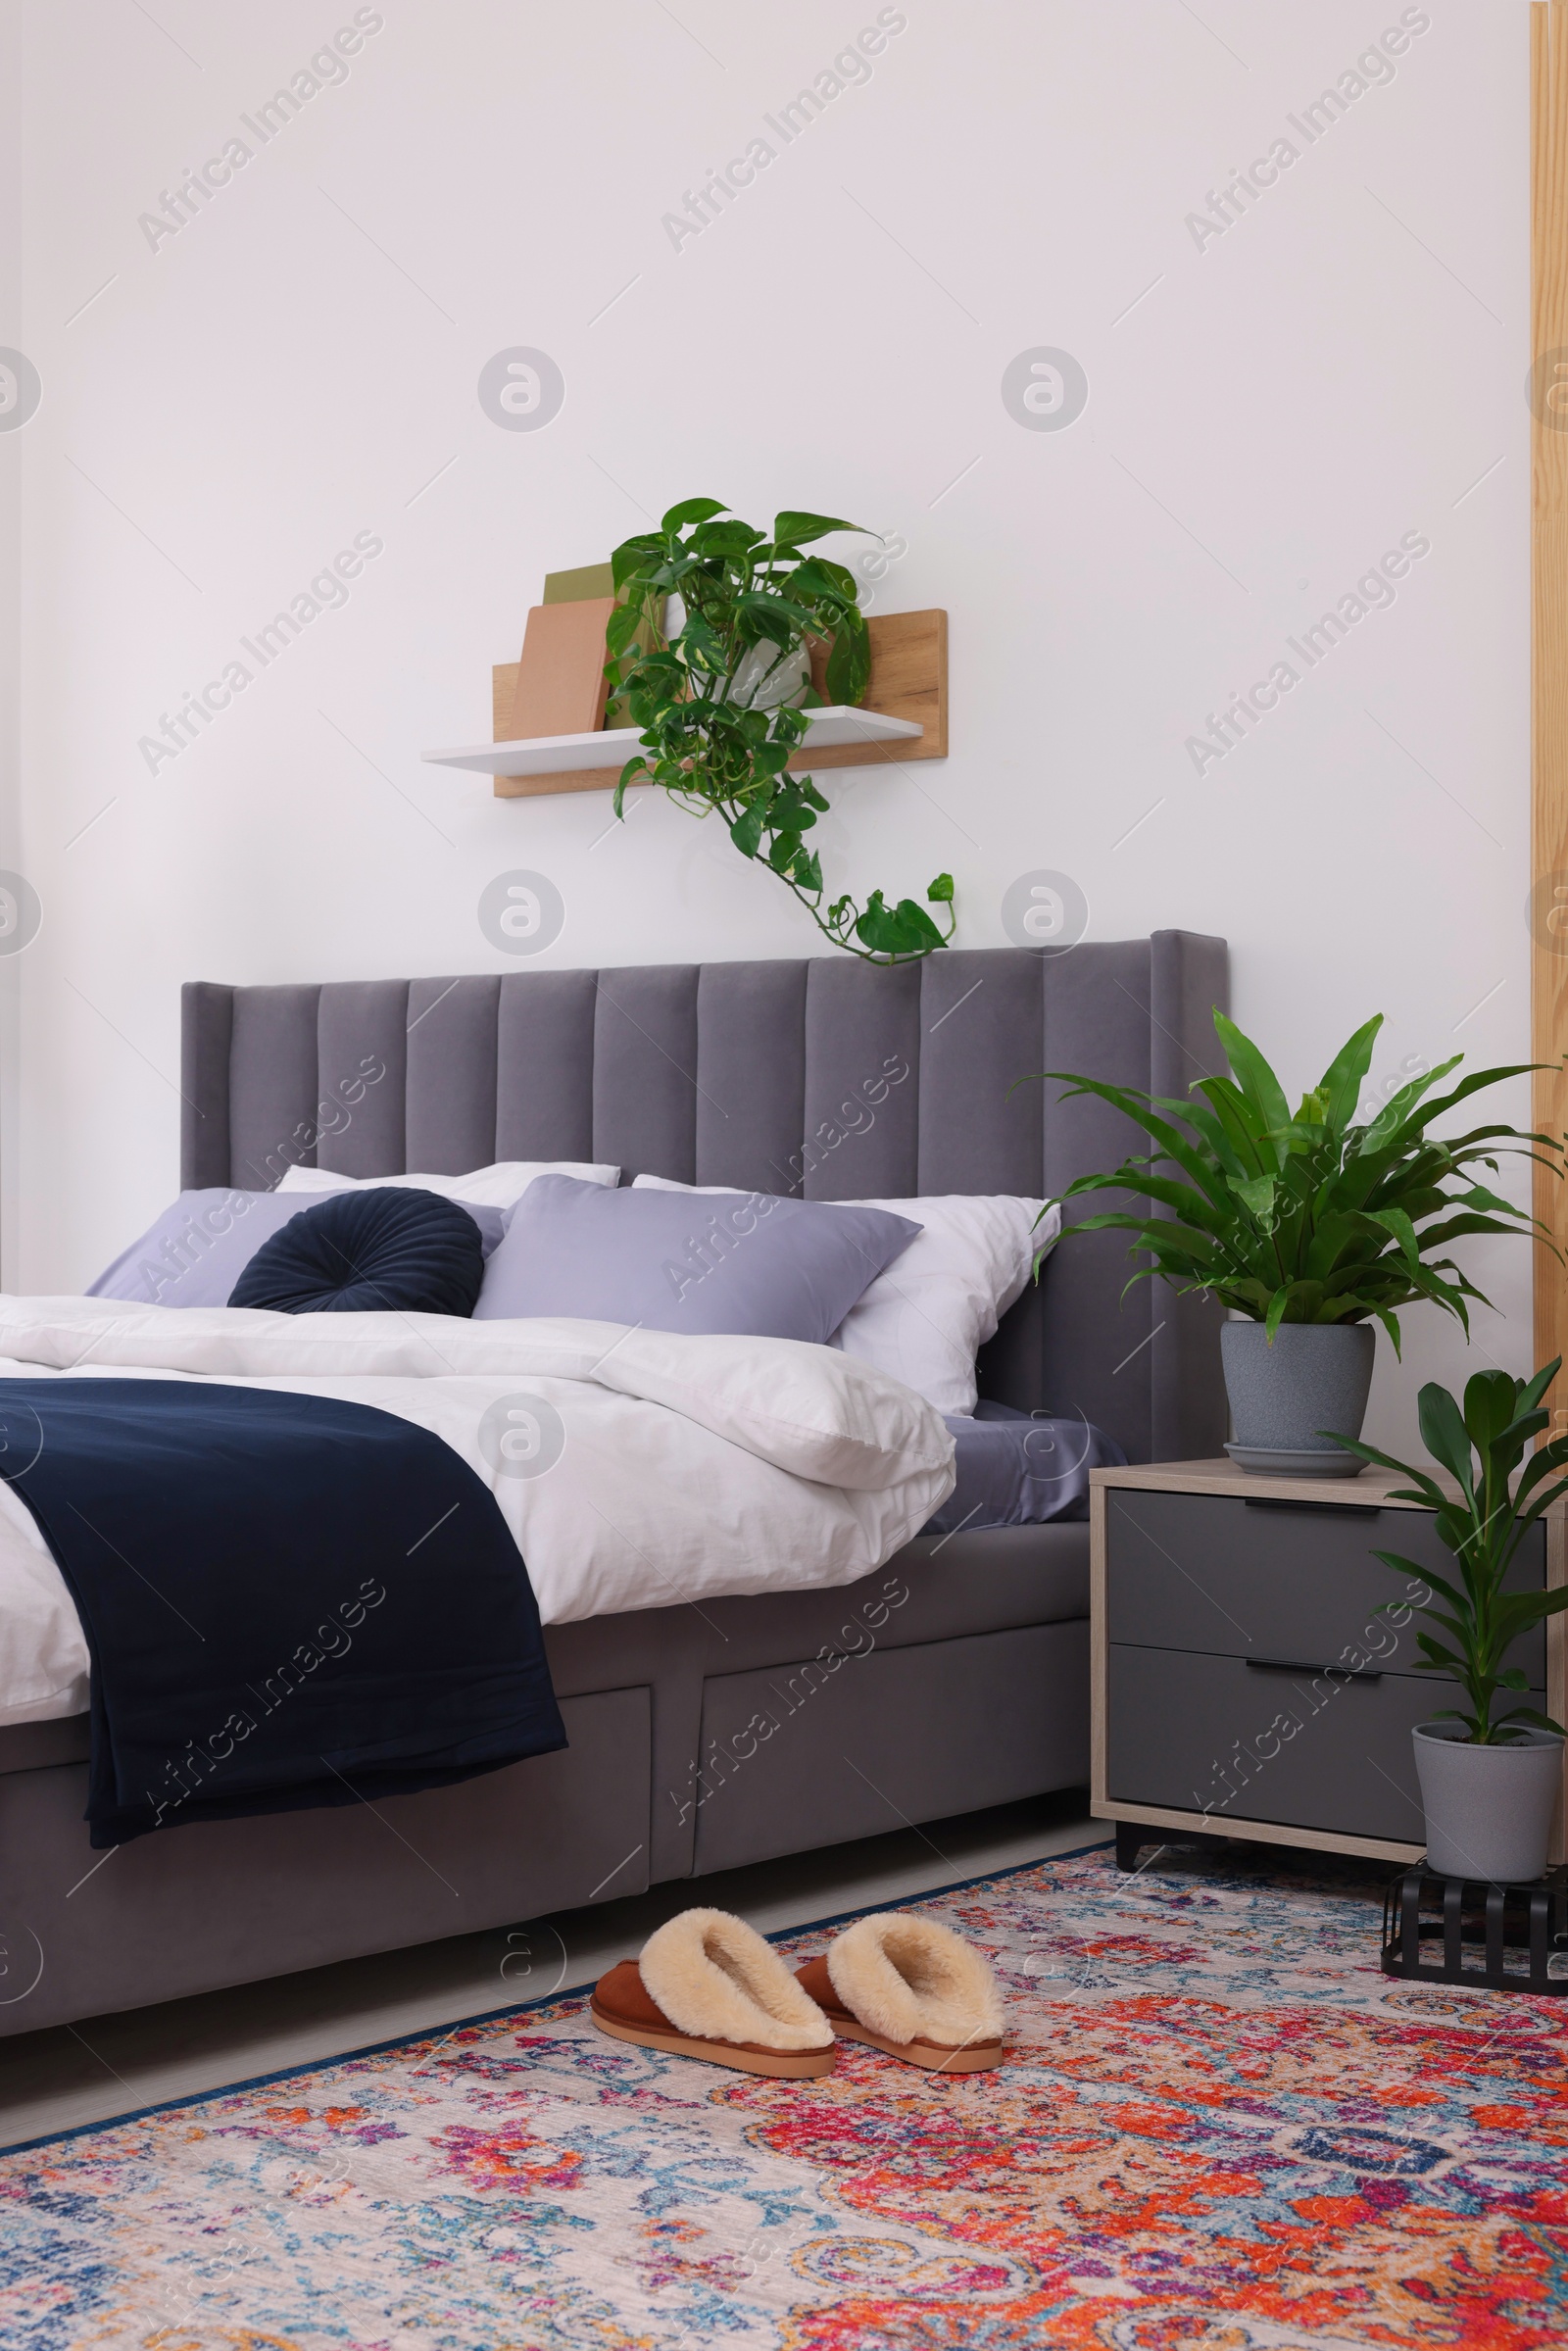 Photo of Beautiful green houseplants and bed in room. Bedroom interior